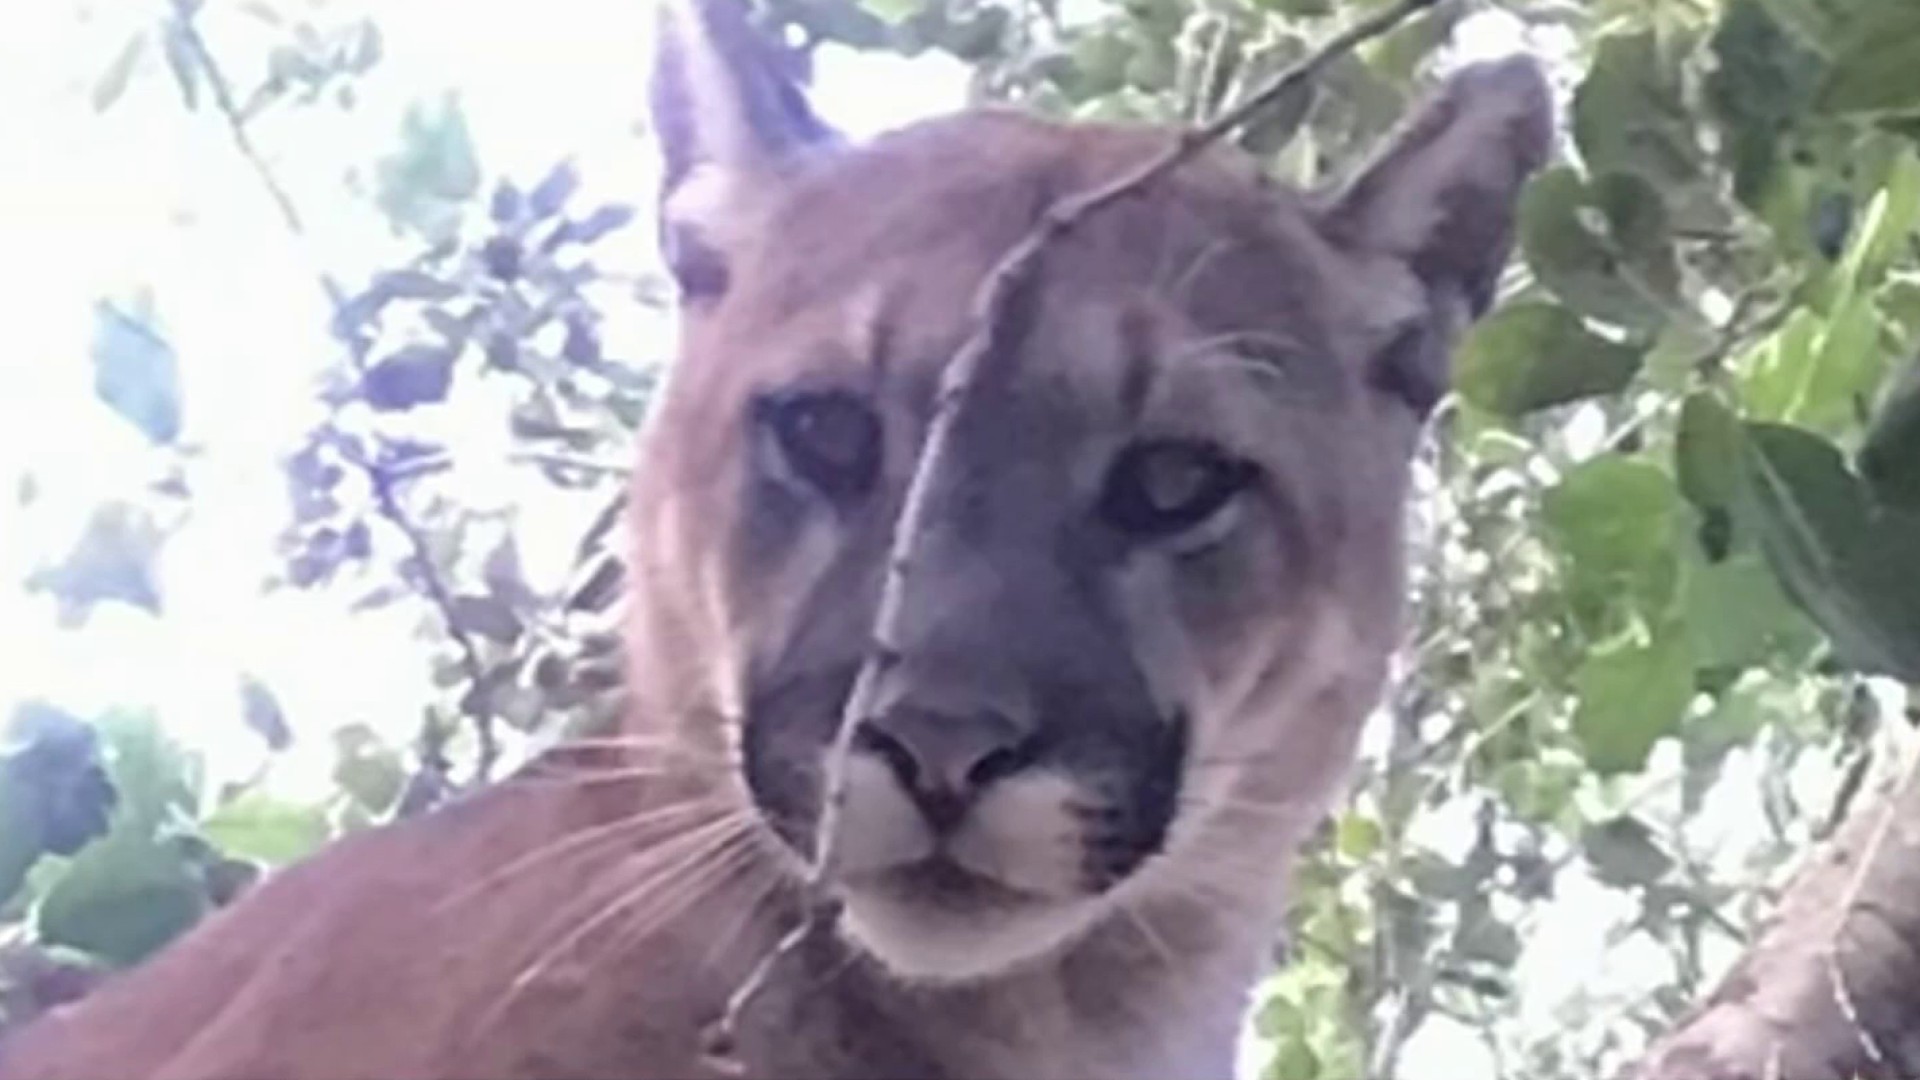 Mountain lion, or lions, won't leave Red Lodge